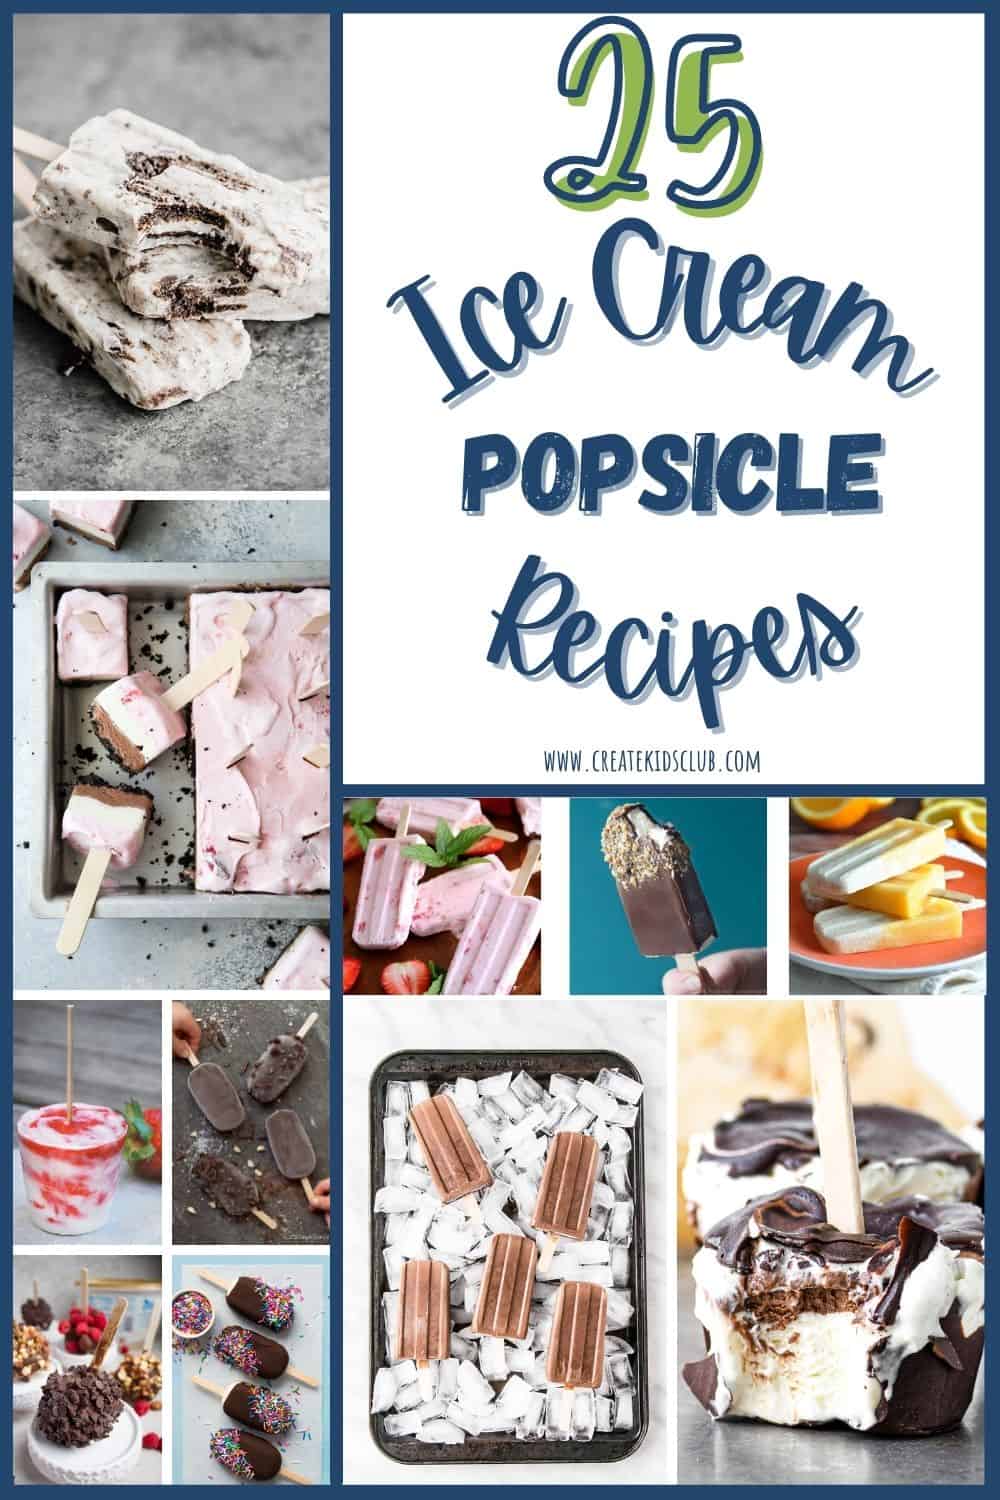 11 pictures of ice cream popsicles for a recipe round up post.